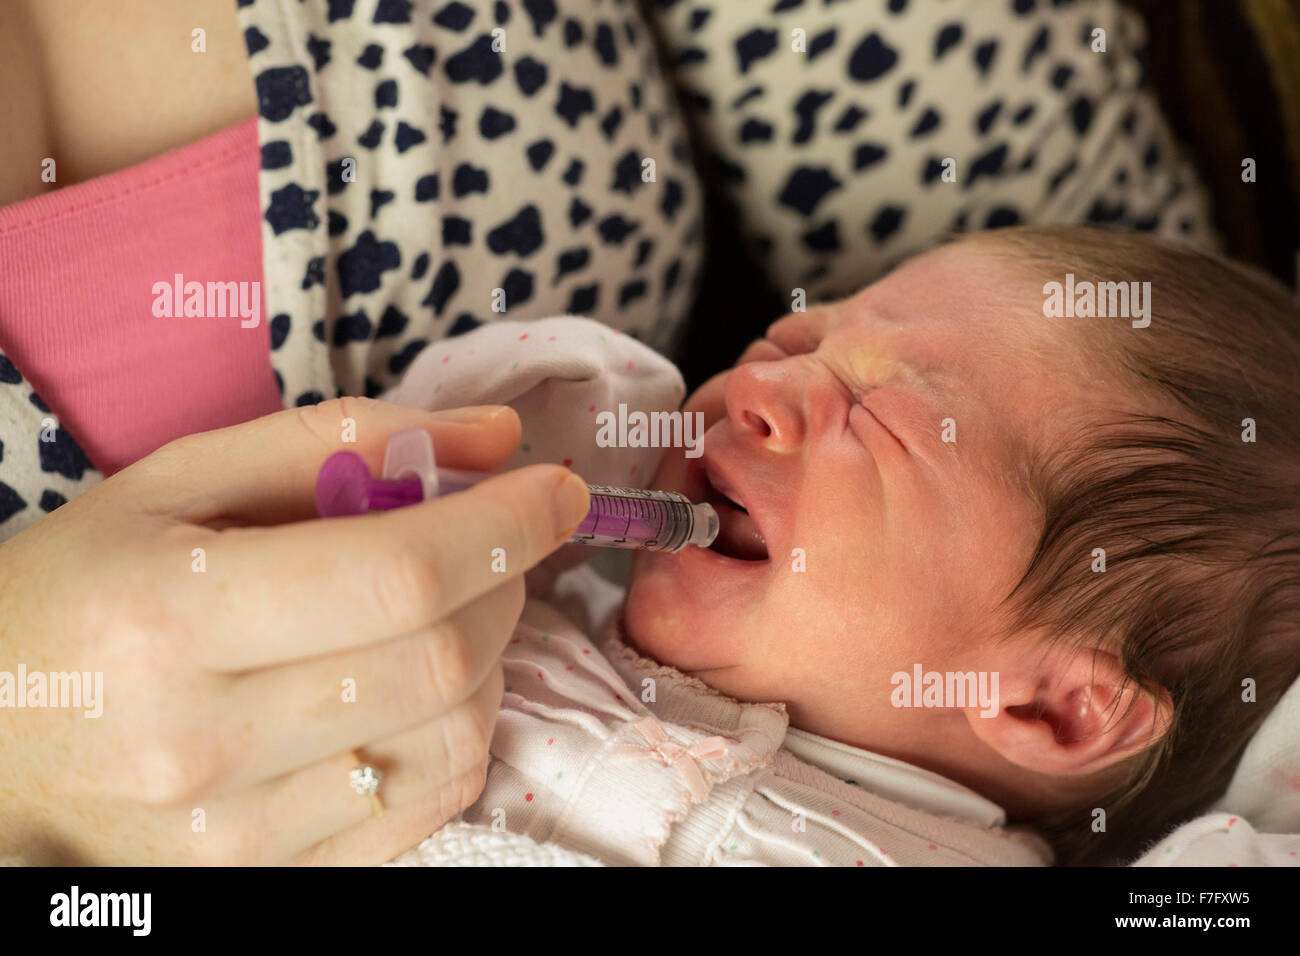 mum giving baby medicine with a syringe Stock Photo